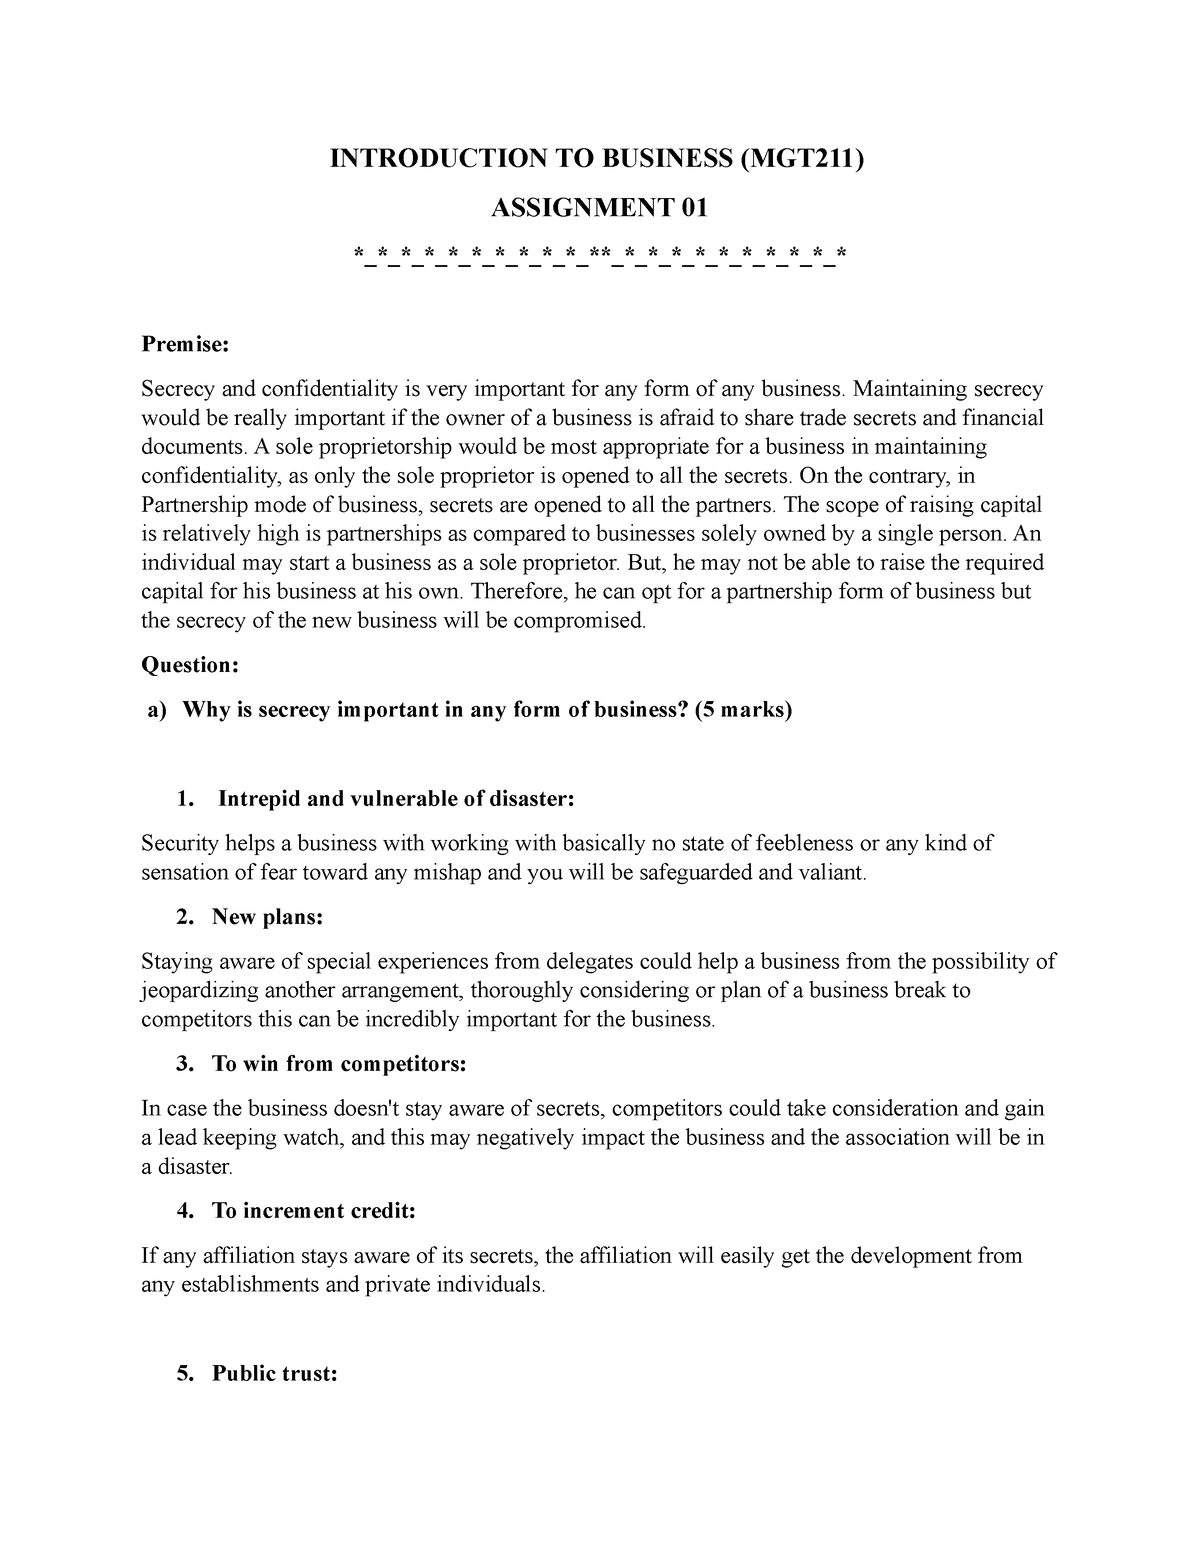 introduction to business (mgt211) assignment 01